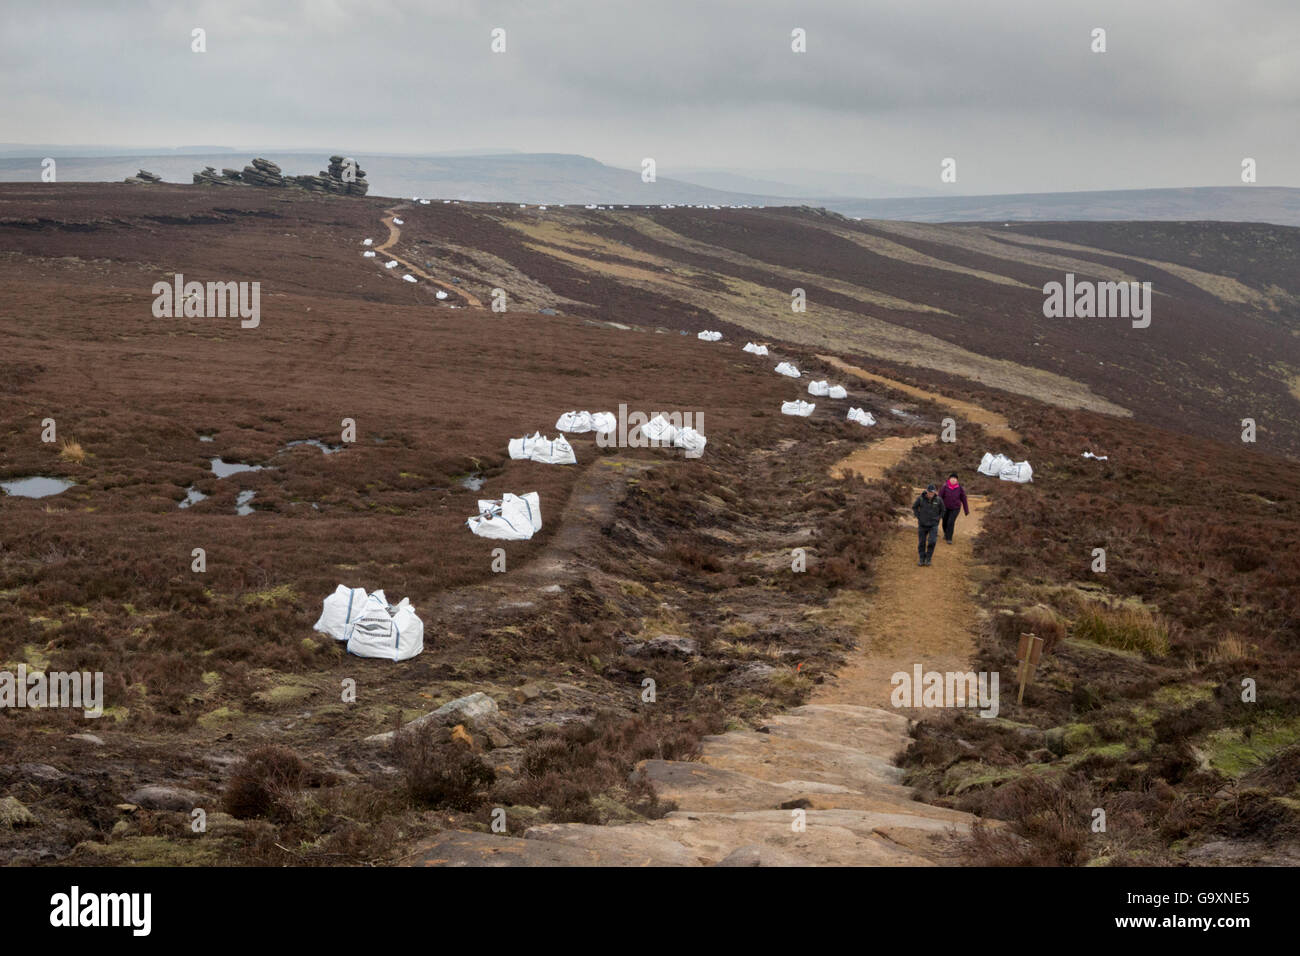 Moorland restoration works, carried out in partnership between Moors for the Future and Natural England to restore the eroded footpath along Derwent Edge, Eroded moorland surrounding the path is being re-vegetated using heather brash, seen here in white helicopter bags. Peak District National Park, Derbyshire, UK. March 2015. Stock Photo